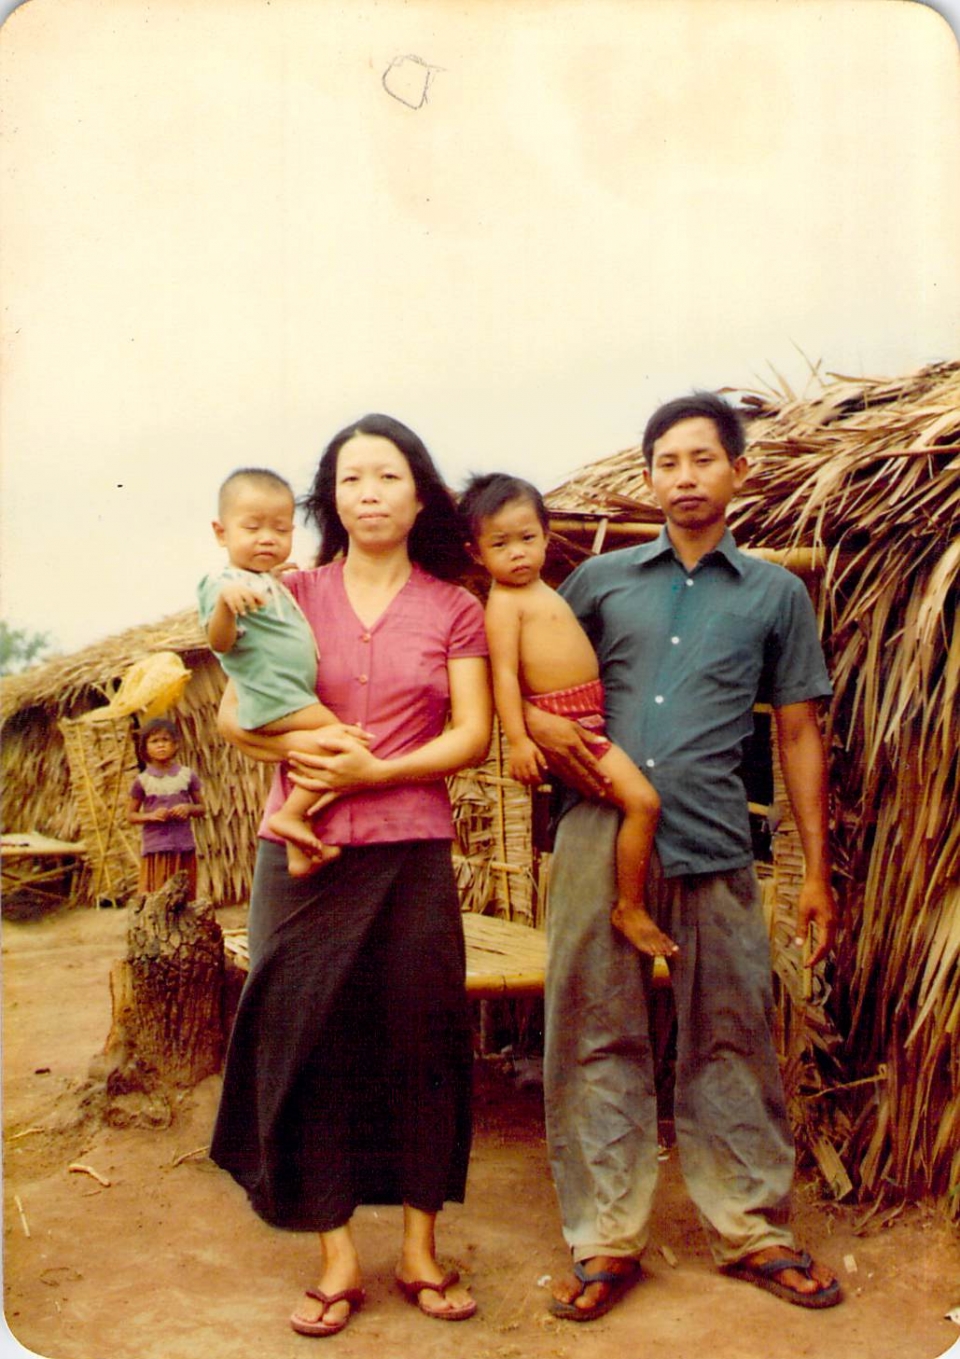 The Be family at a Thailand refugee camp in 1979, with the author as a child at right.